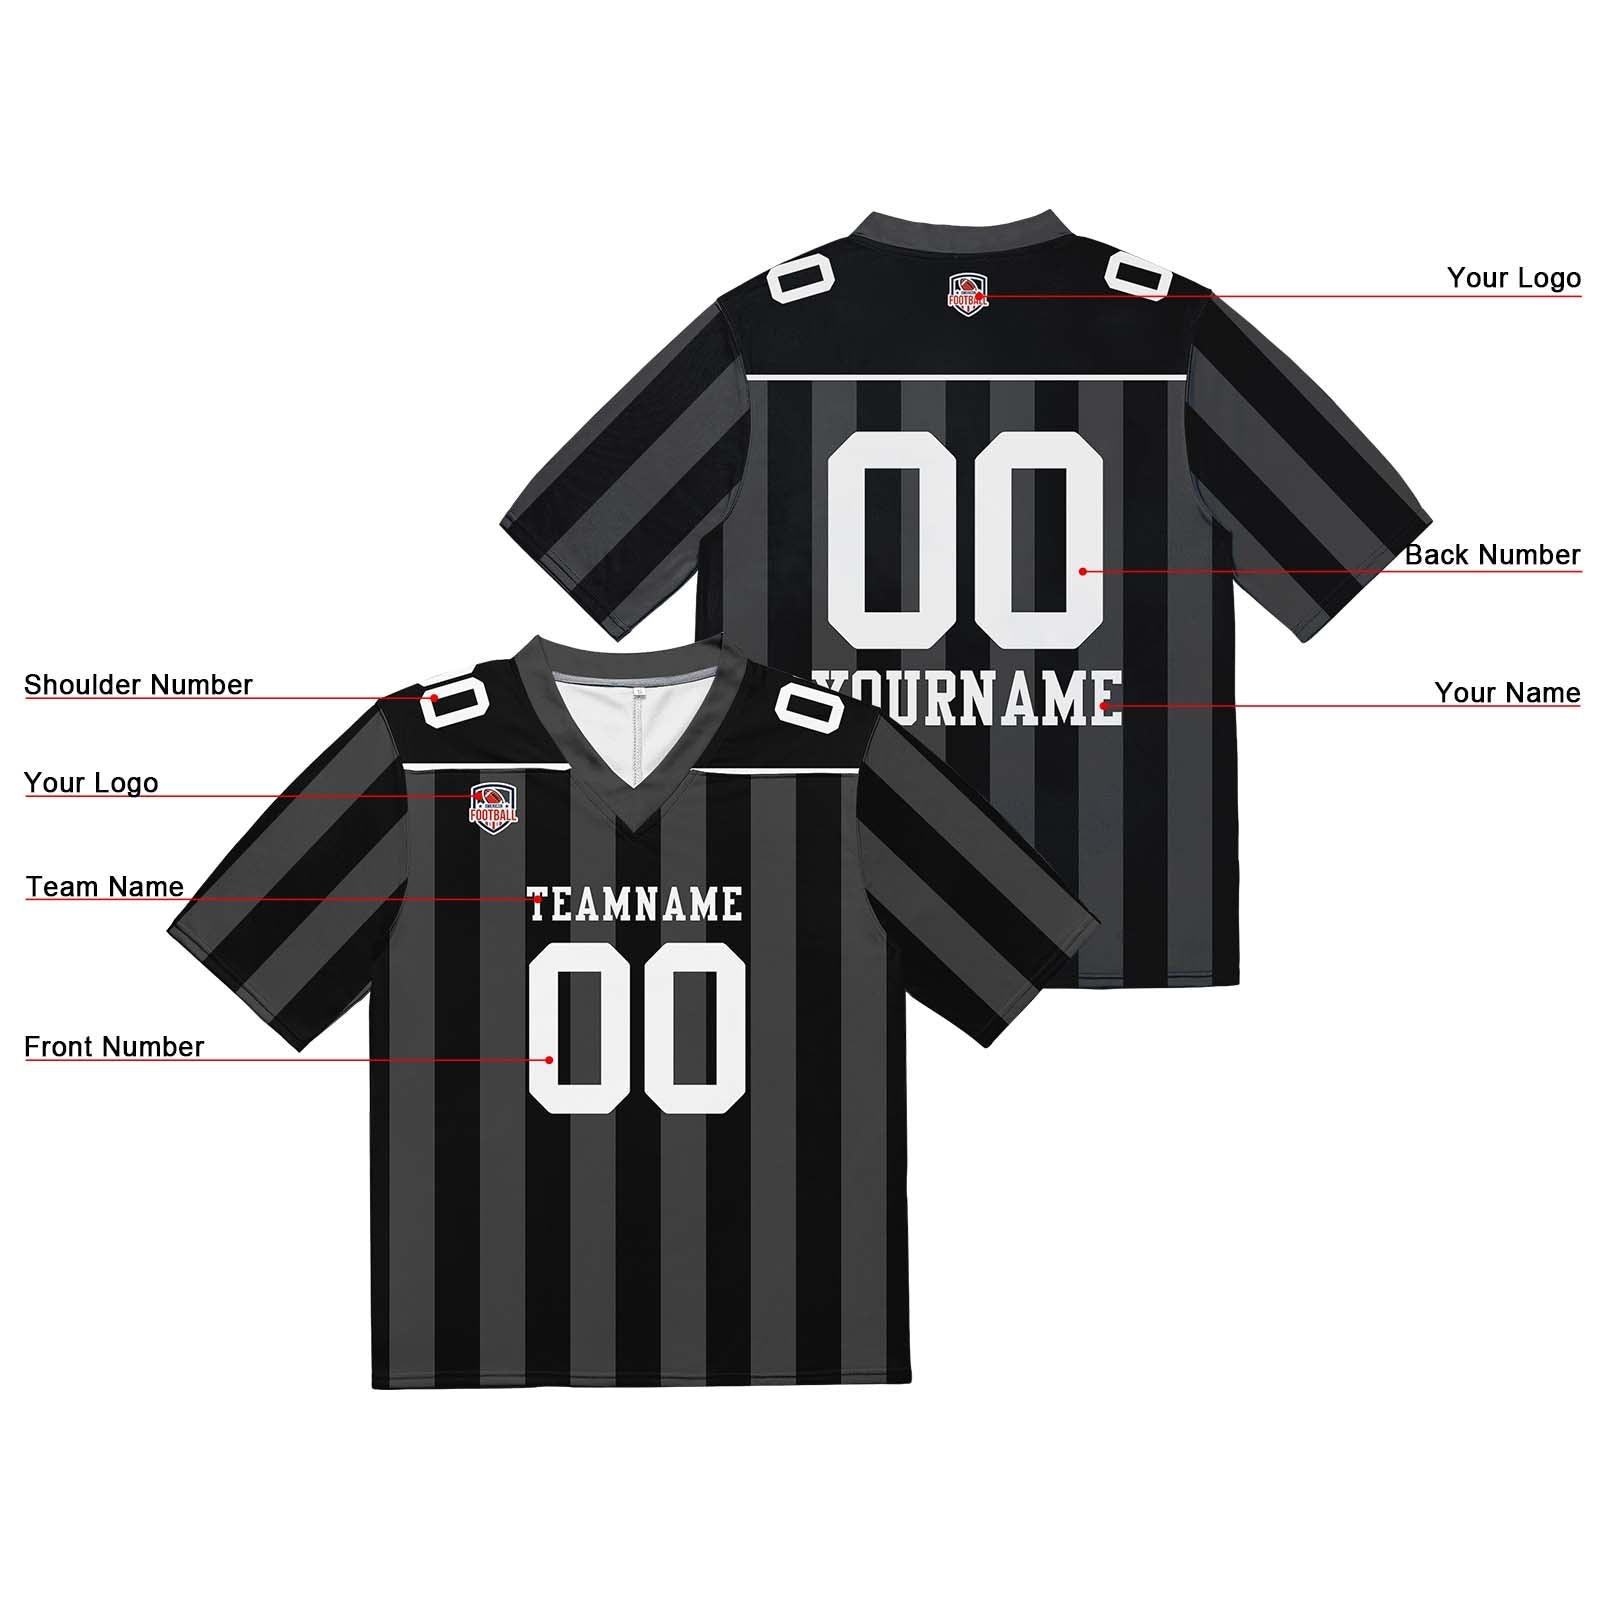 Custom Football Jersey Shirt Personalized Stitched Printed Team Name Number Black & Grey